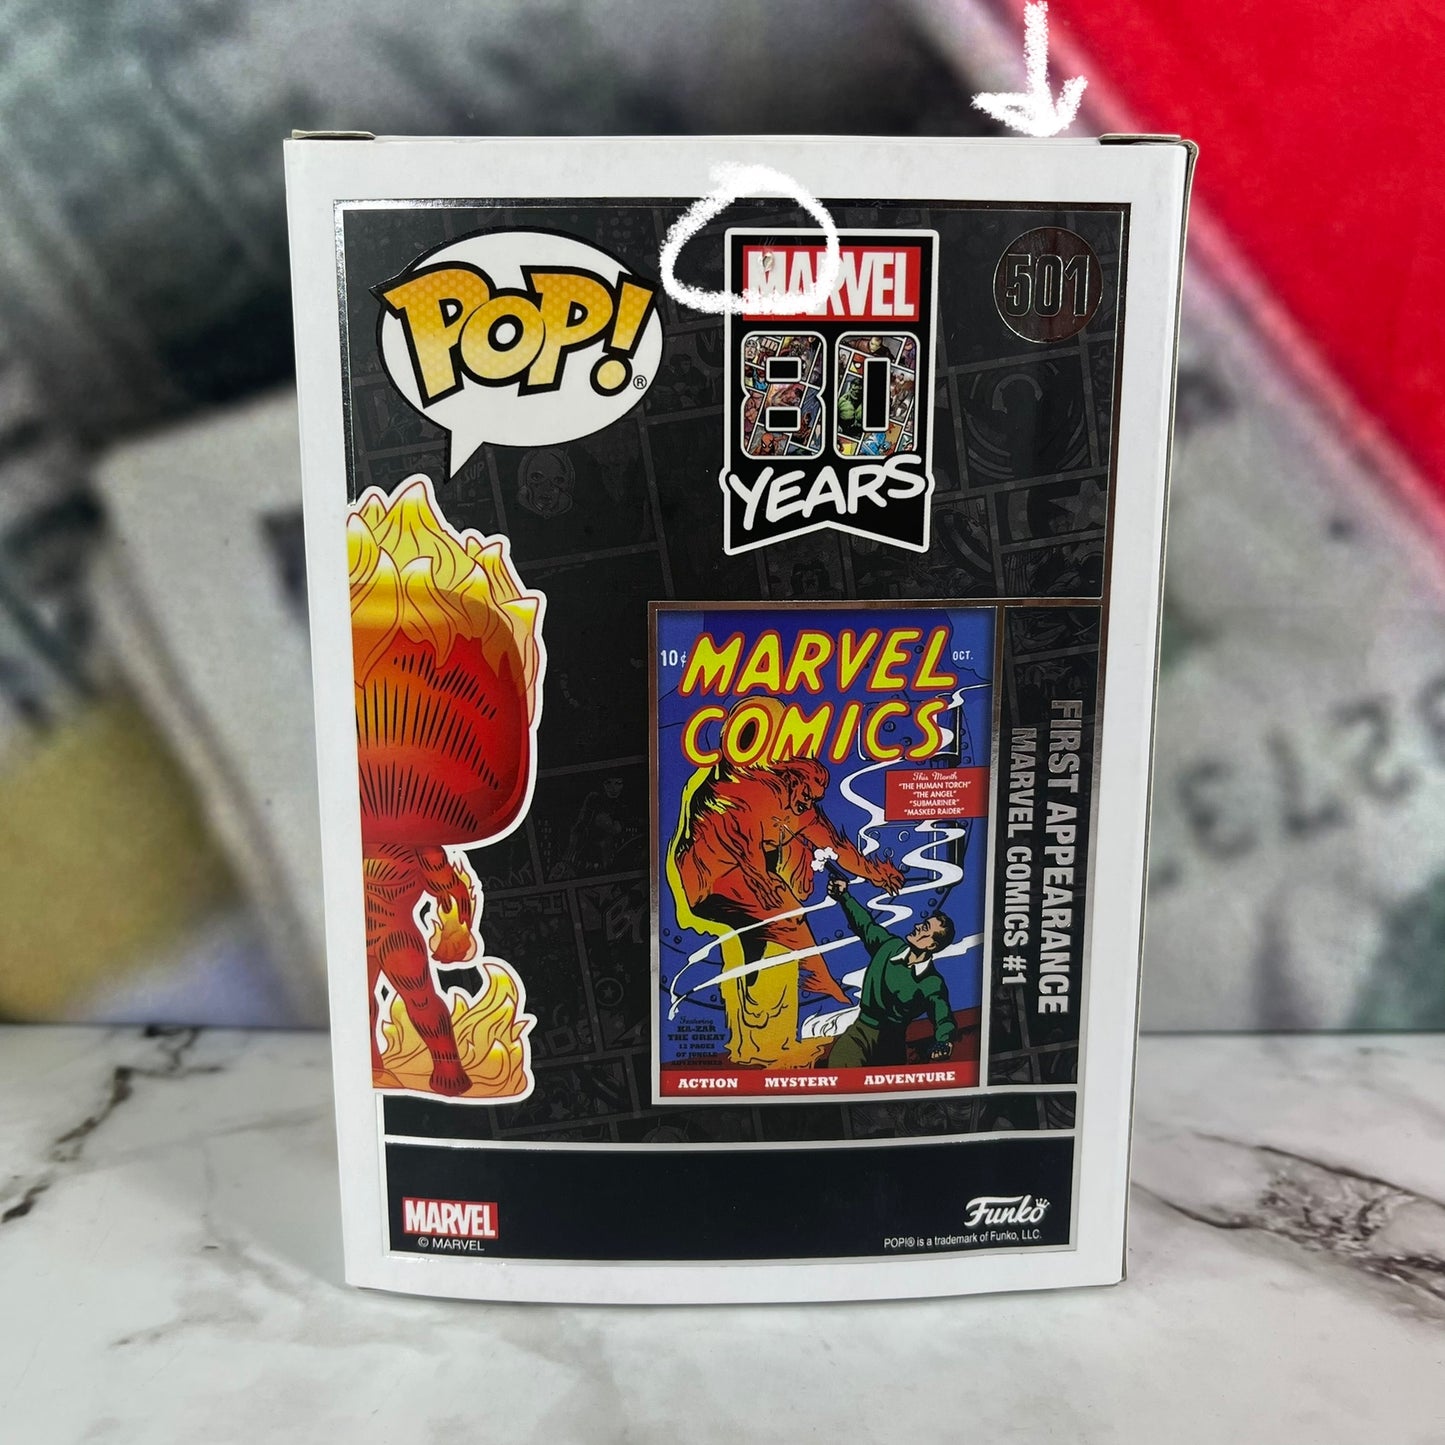 Marvel Funko Pop! Human Torch (First Appearance) #501